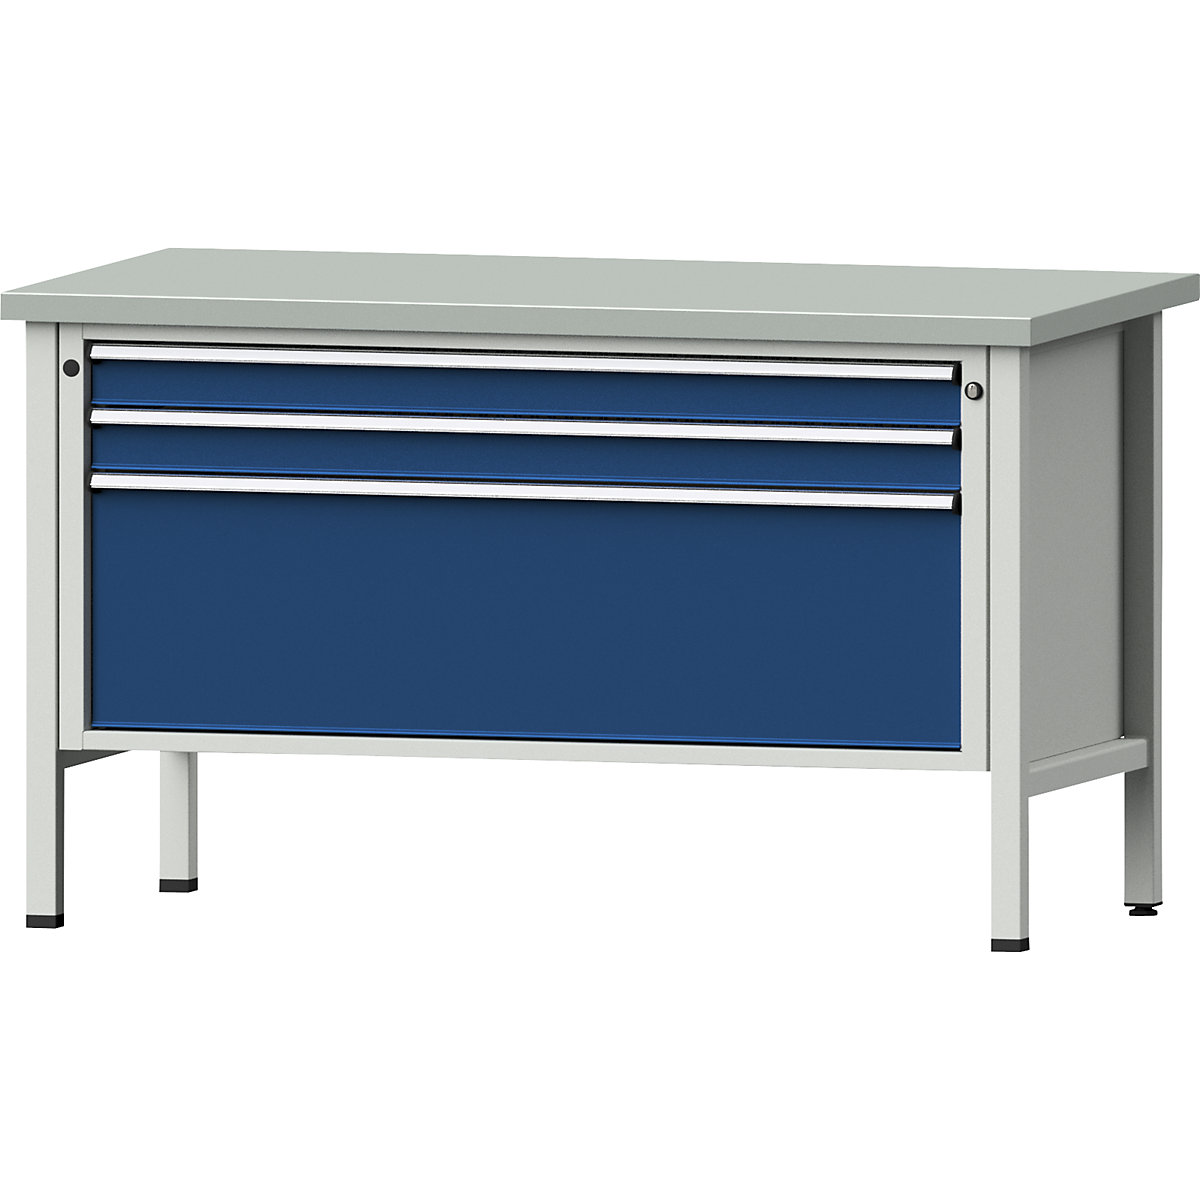 Workbench 1500 mm wide, frame construction – ANKE, 3 drawers: 2 x 90, 1 x 360 mm, sheet steel covered worktop, height 890 mm-7